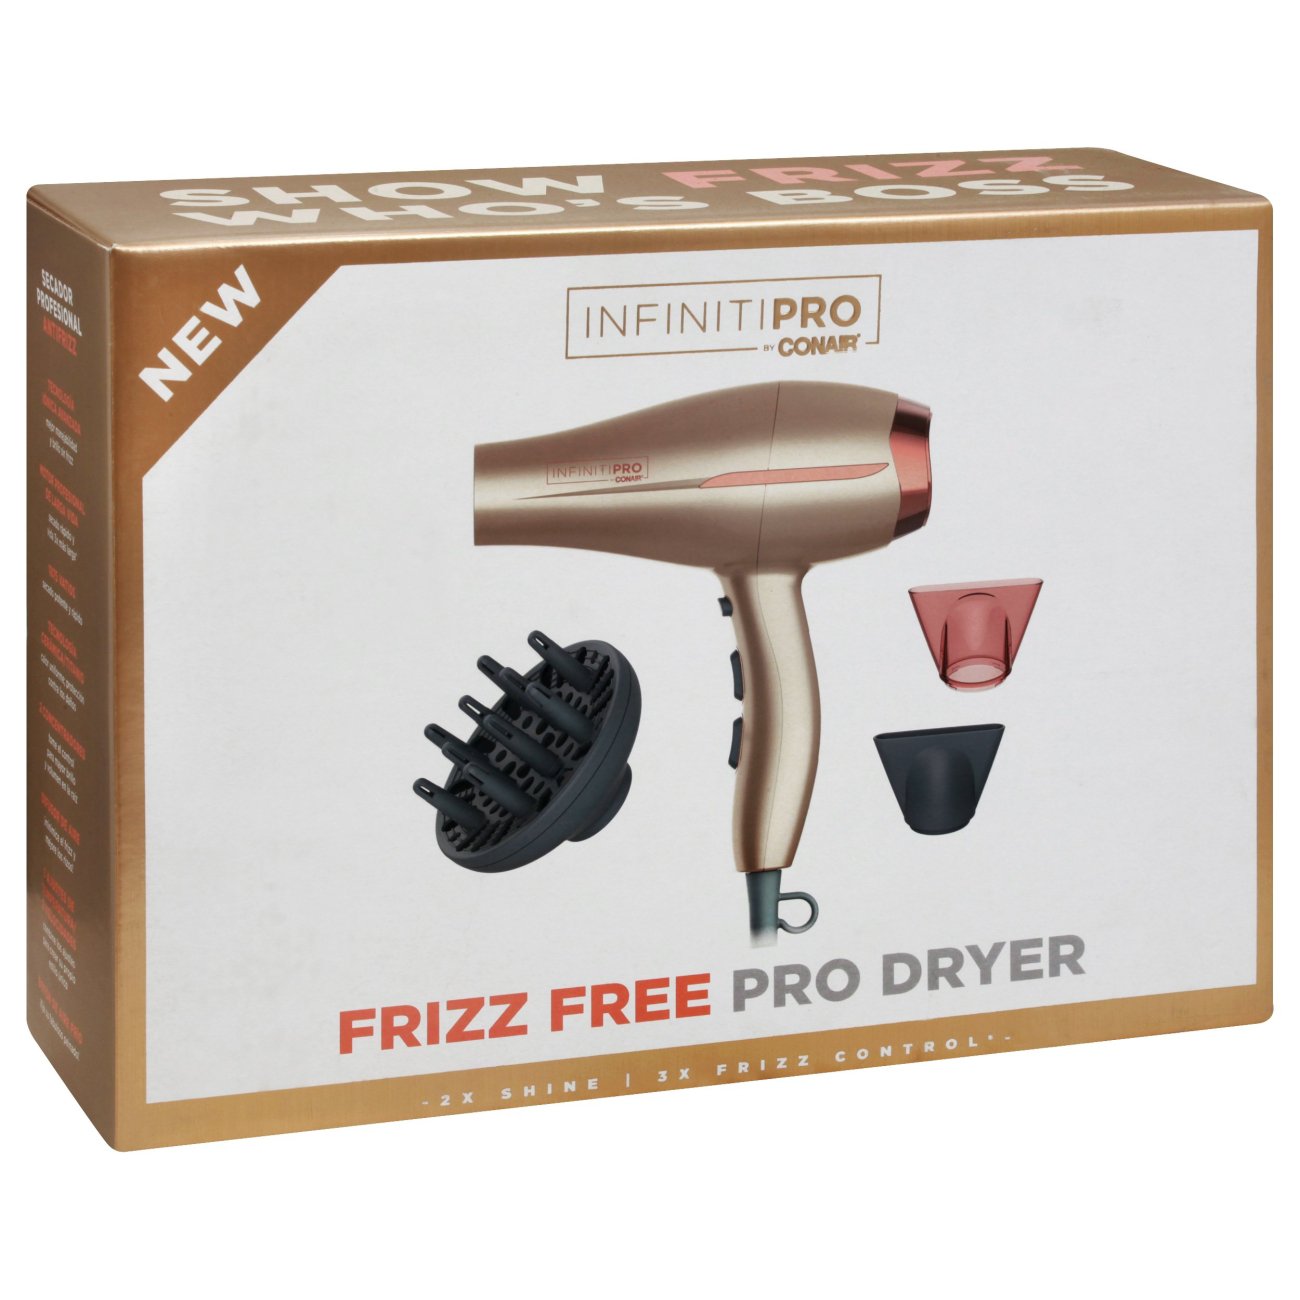 Conair Infinitipro Frizz Free Pro Dryer - Shop Hair Care at H-E-B